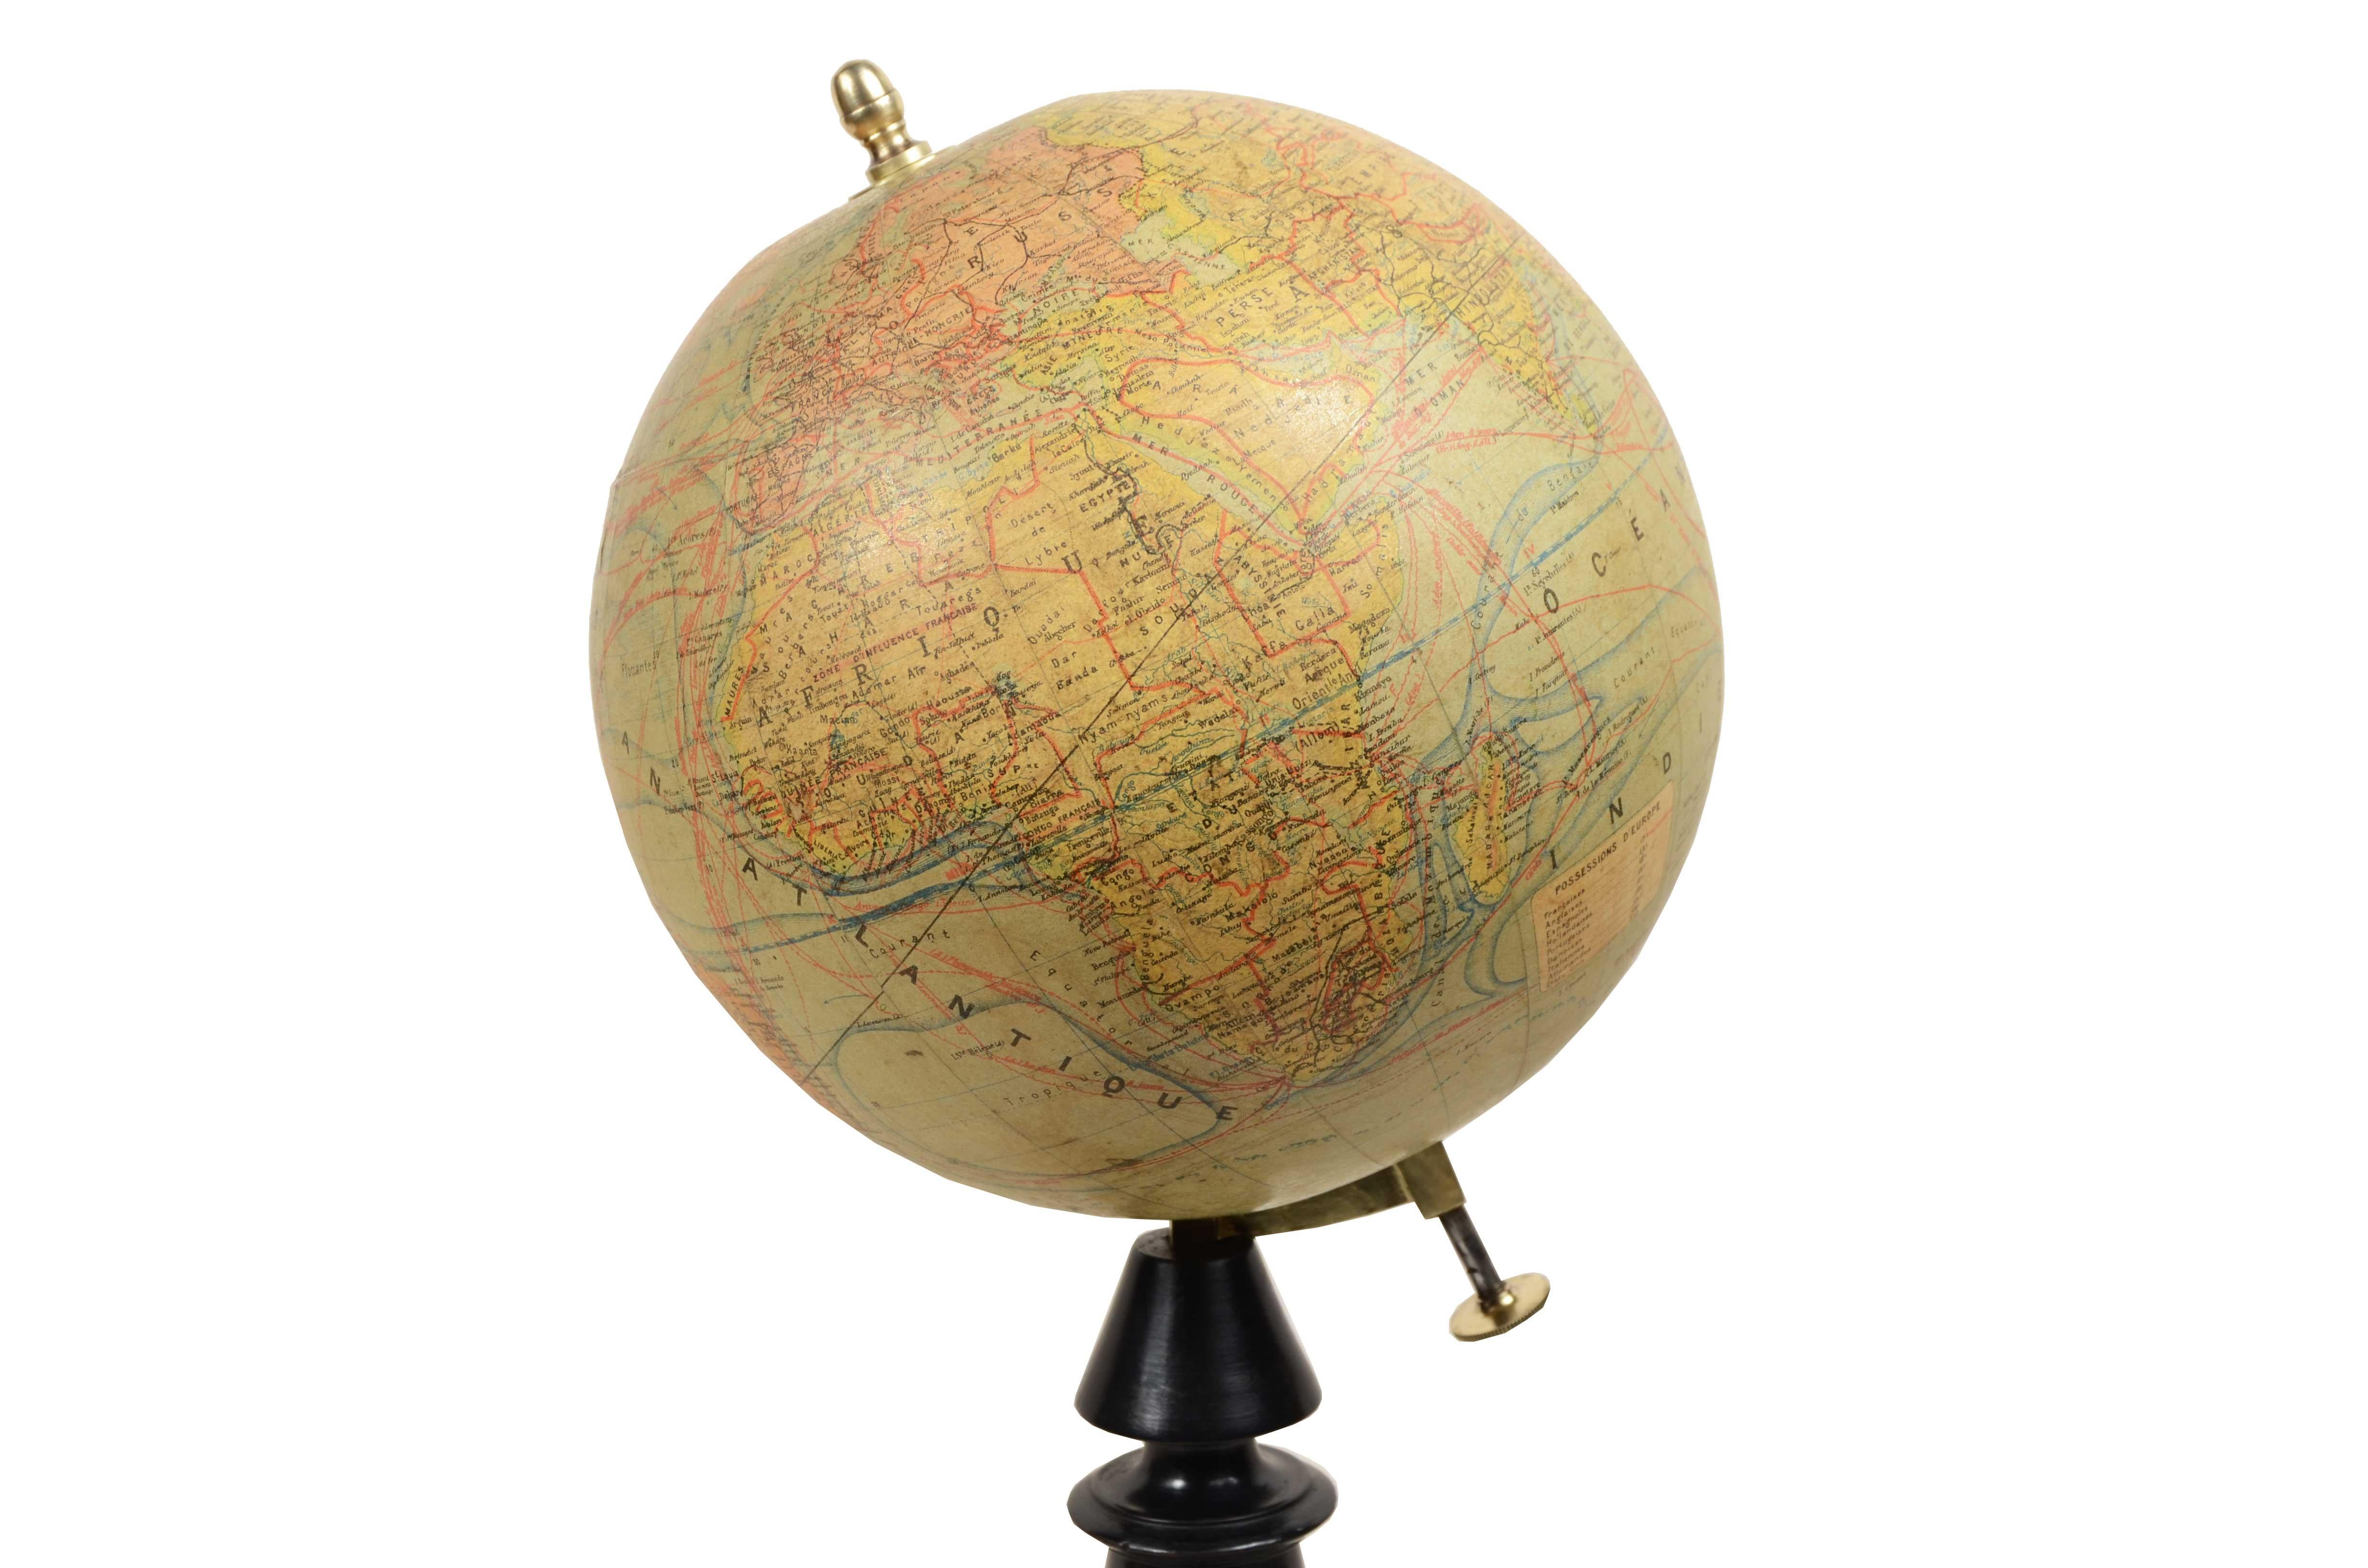 Terrestrial globe edited in the late 19th century by French geographer J. Forest; in addition to the spatial map, ocean currents and major trade routes of the period are depicted. Papier-mâché and plaster sphere covered with the segments of